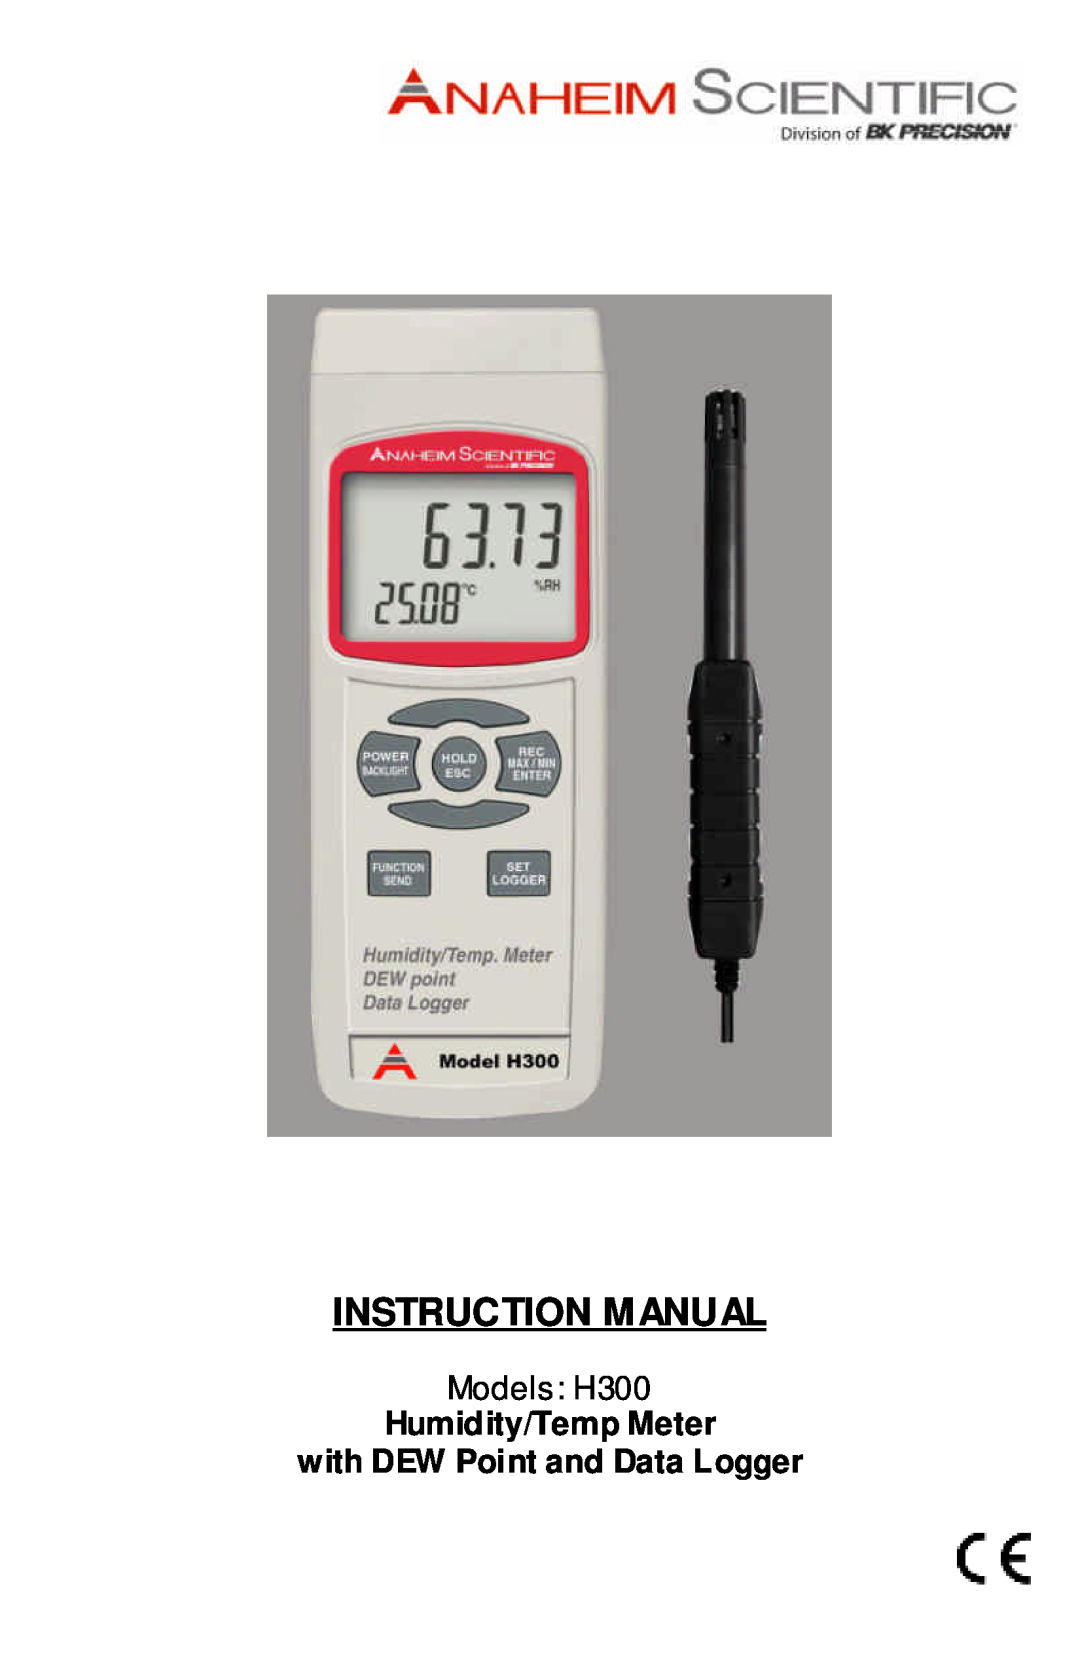 Anaheim instruction manual Humidity/Temp Meter, with DEW Point and Data Logger, Models H300 